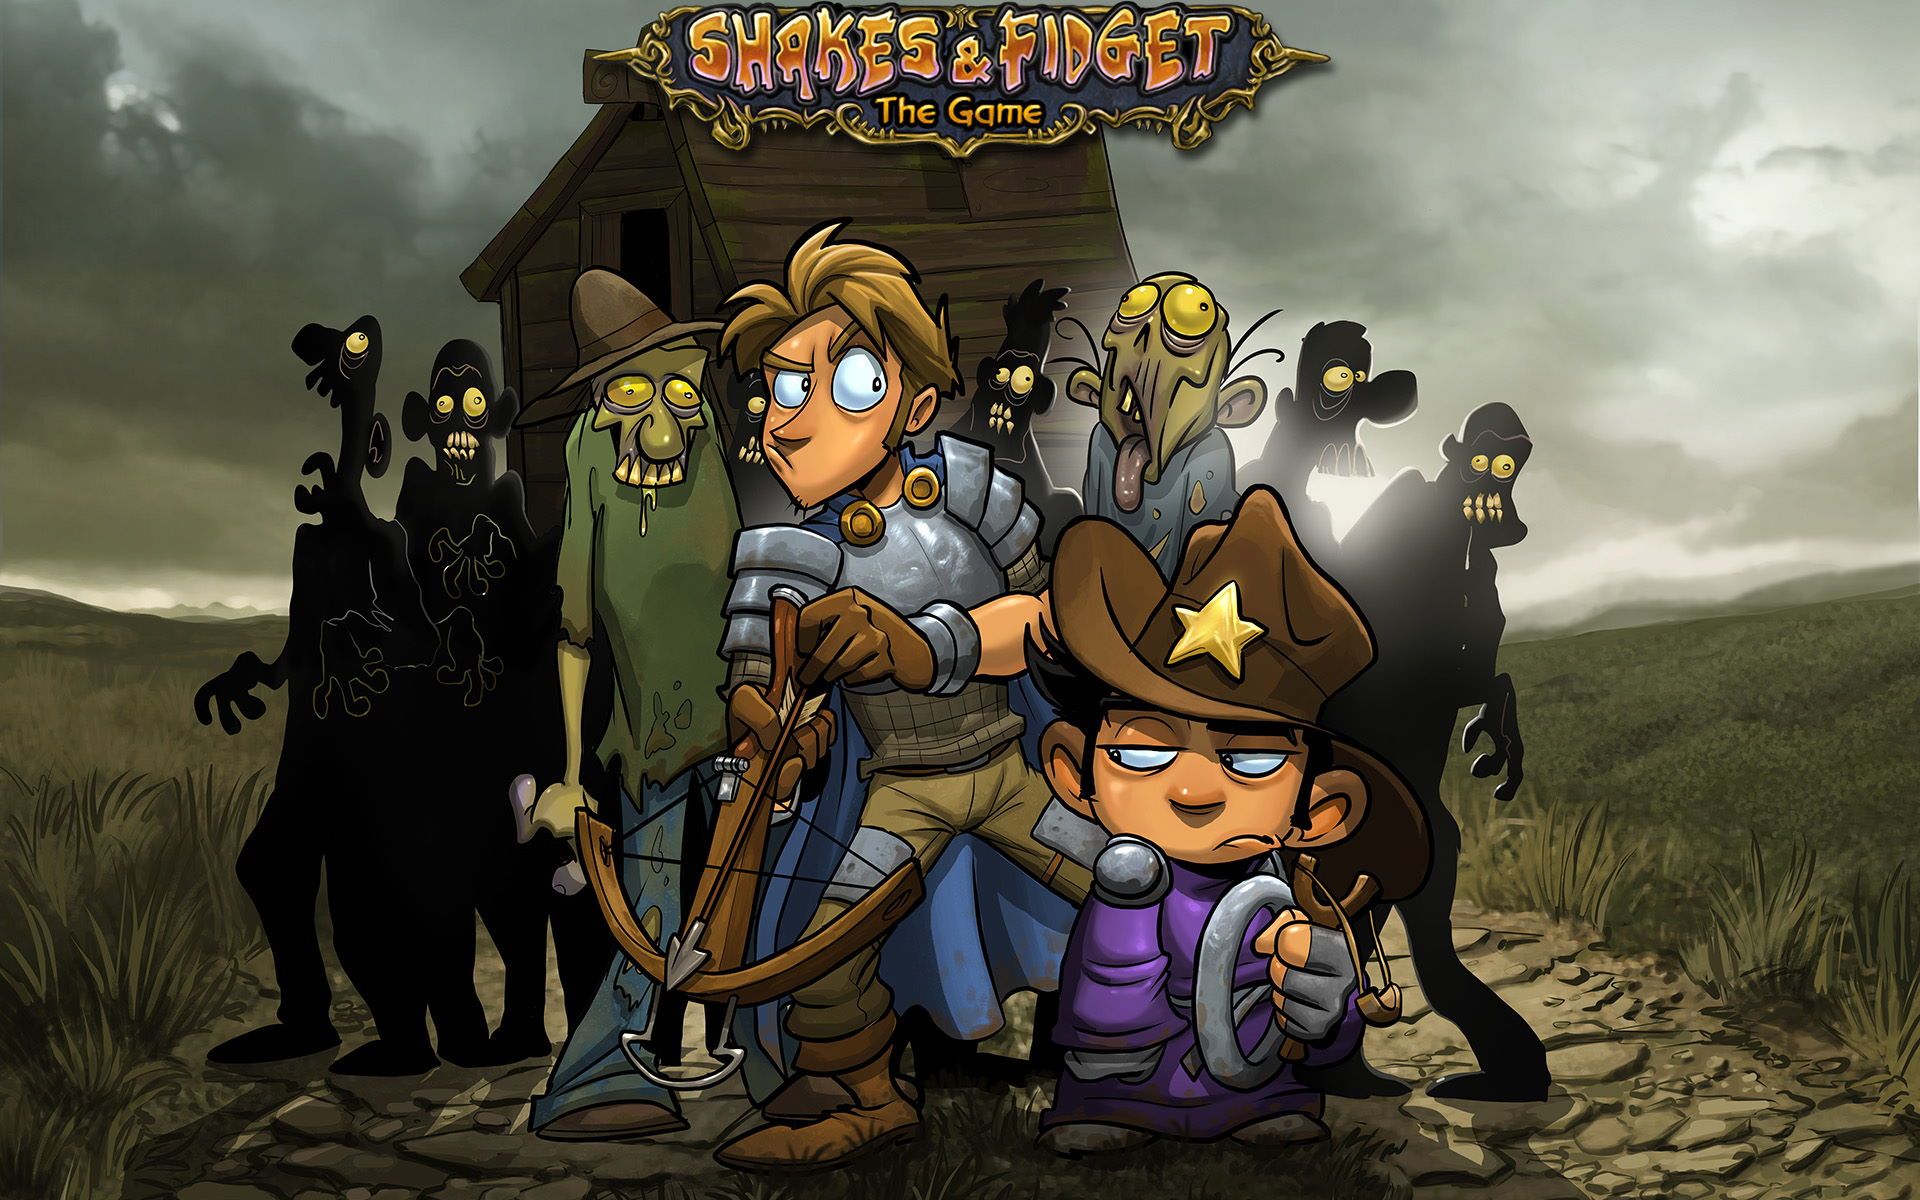 Shakes & Fidget: All About the Blacksmith